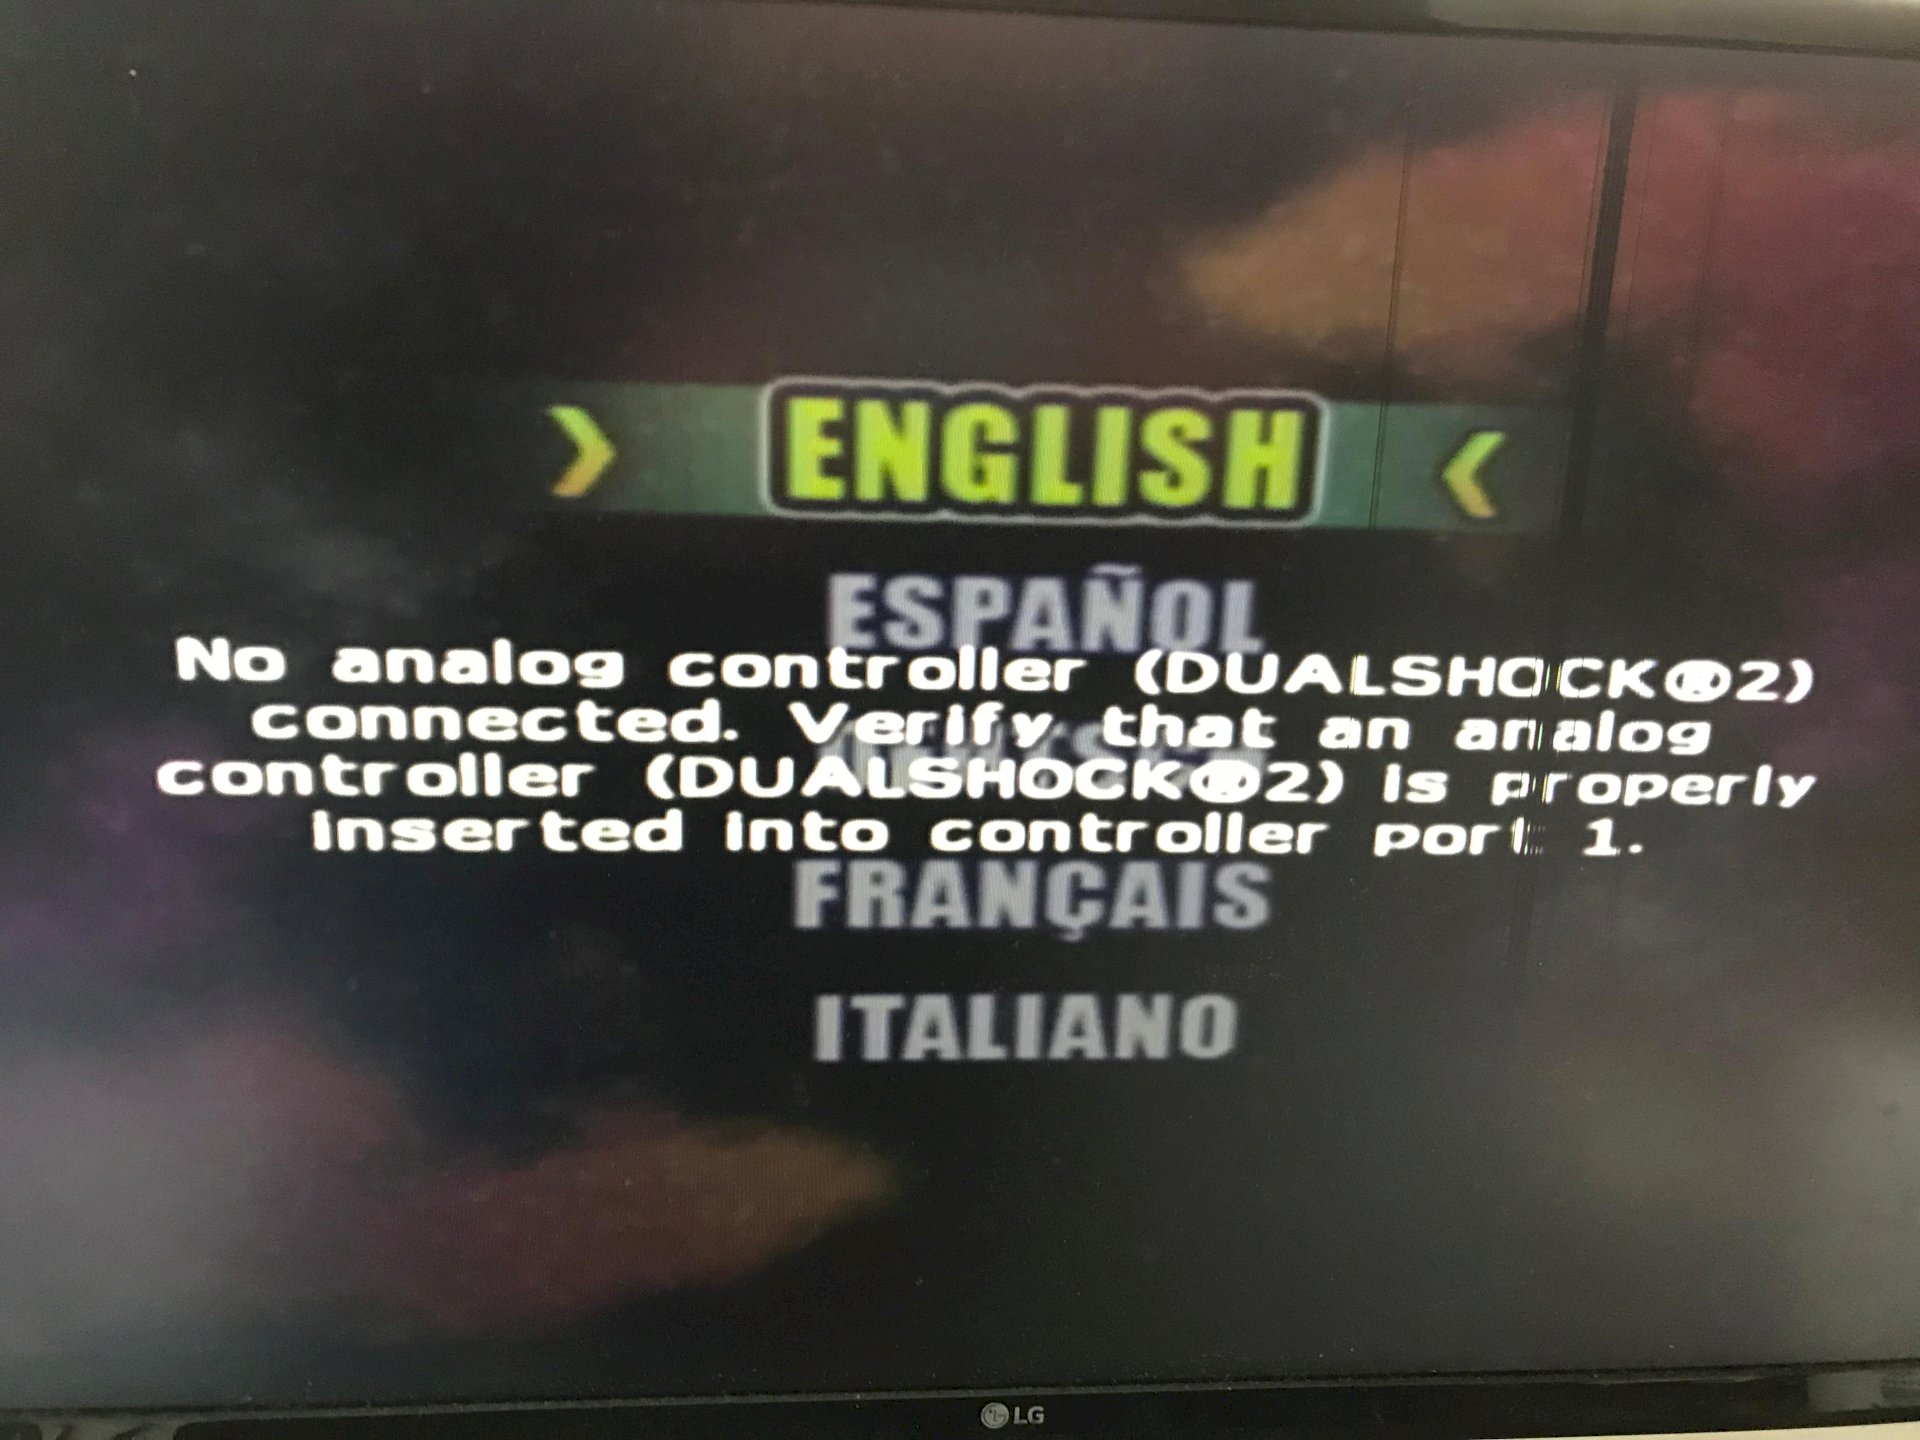 Playstation 2 controller error message while playing - 2